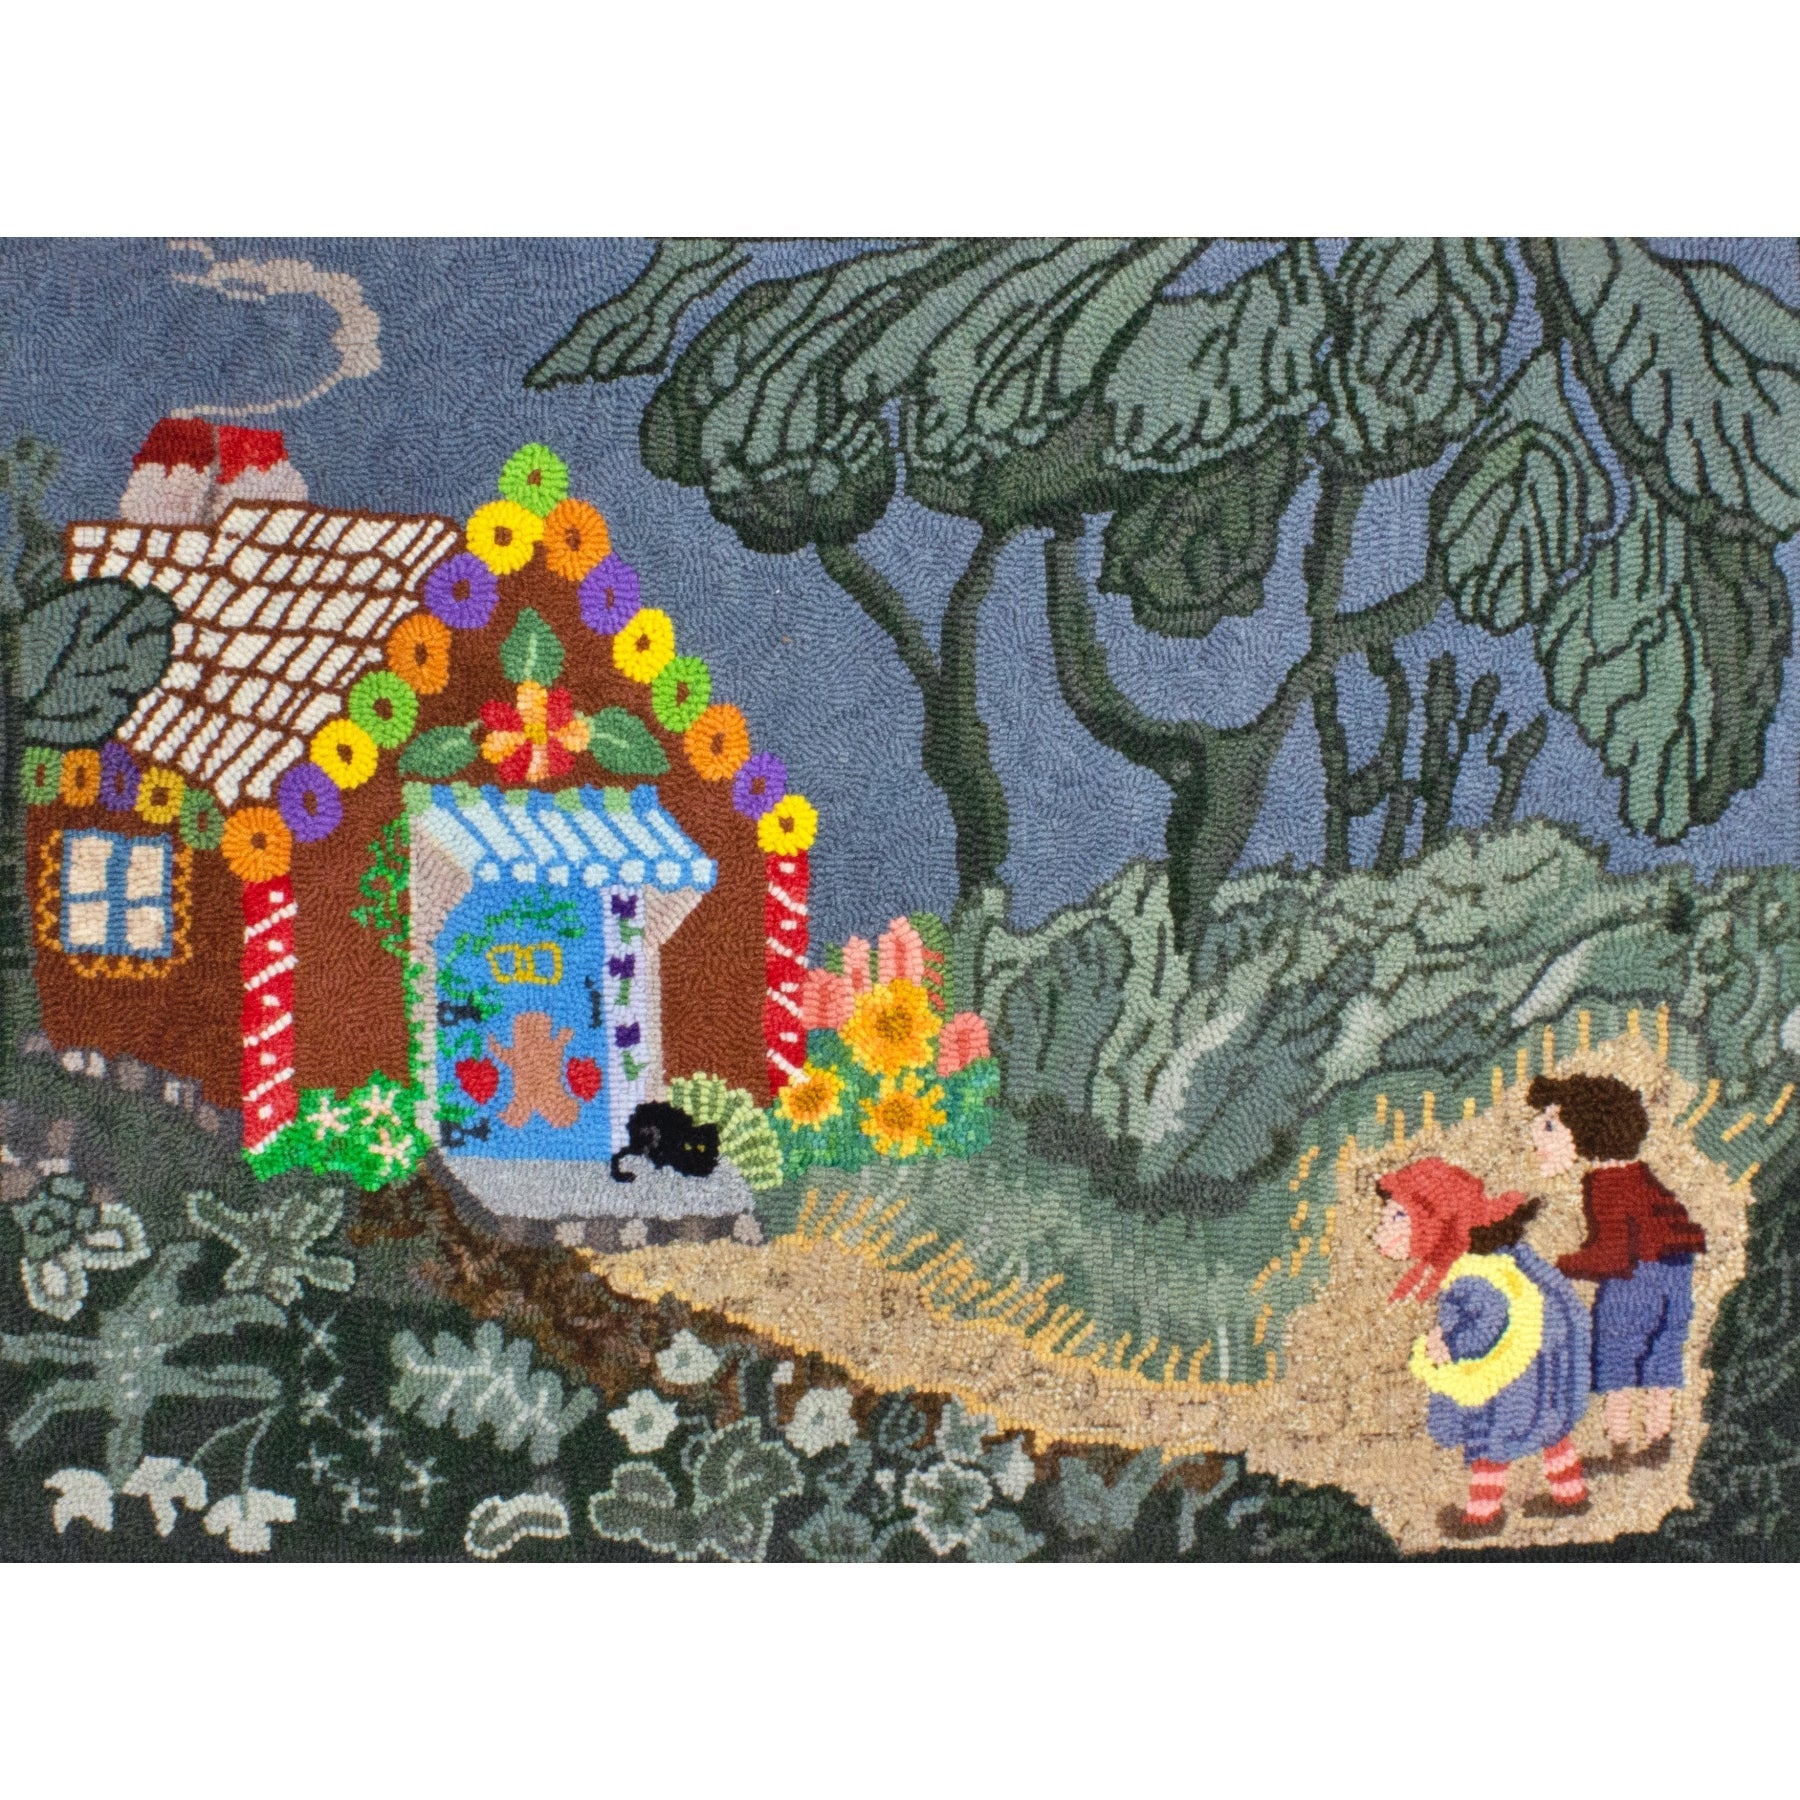 Hansel and Gretel-Hansel and Gretel’s first sighting of the Gingerbread House, ill. Wanda Gag, 1917, rug hooked by Katharine Webster